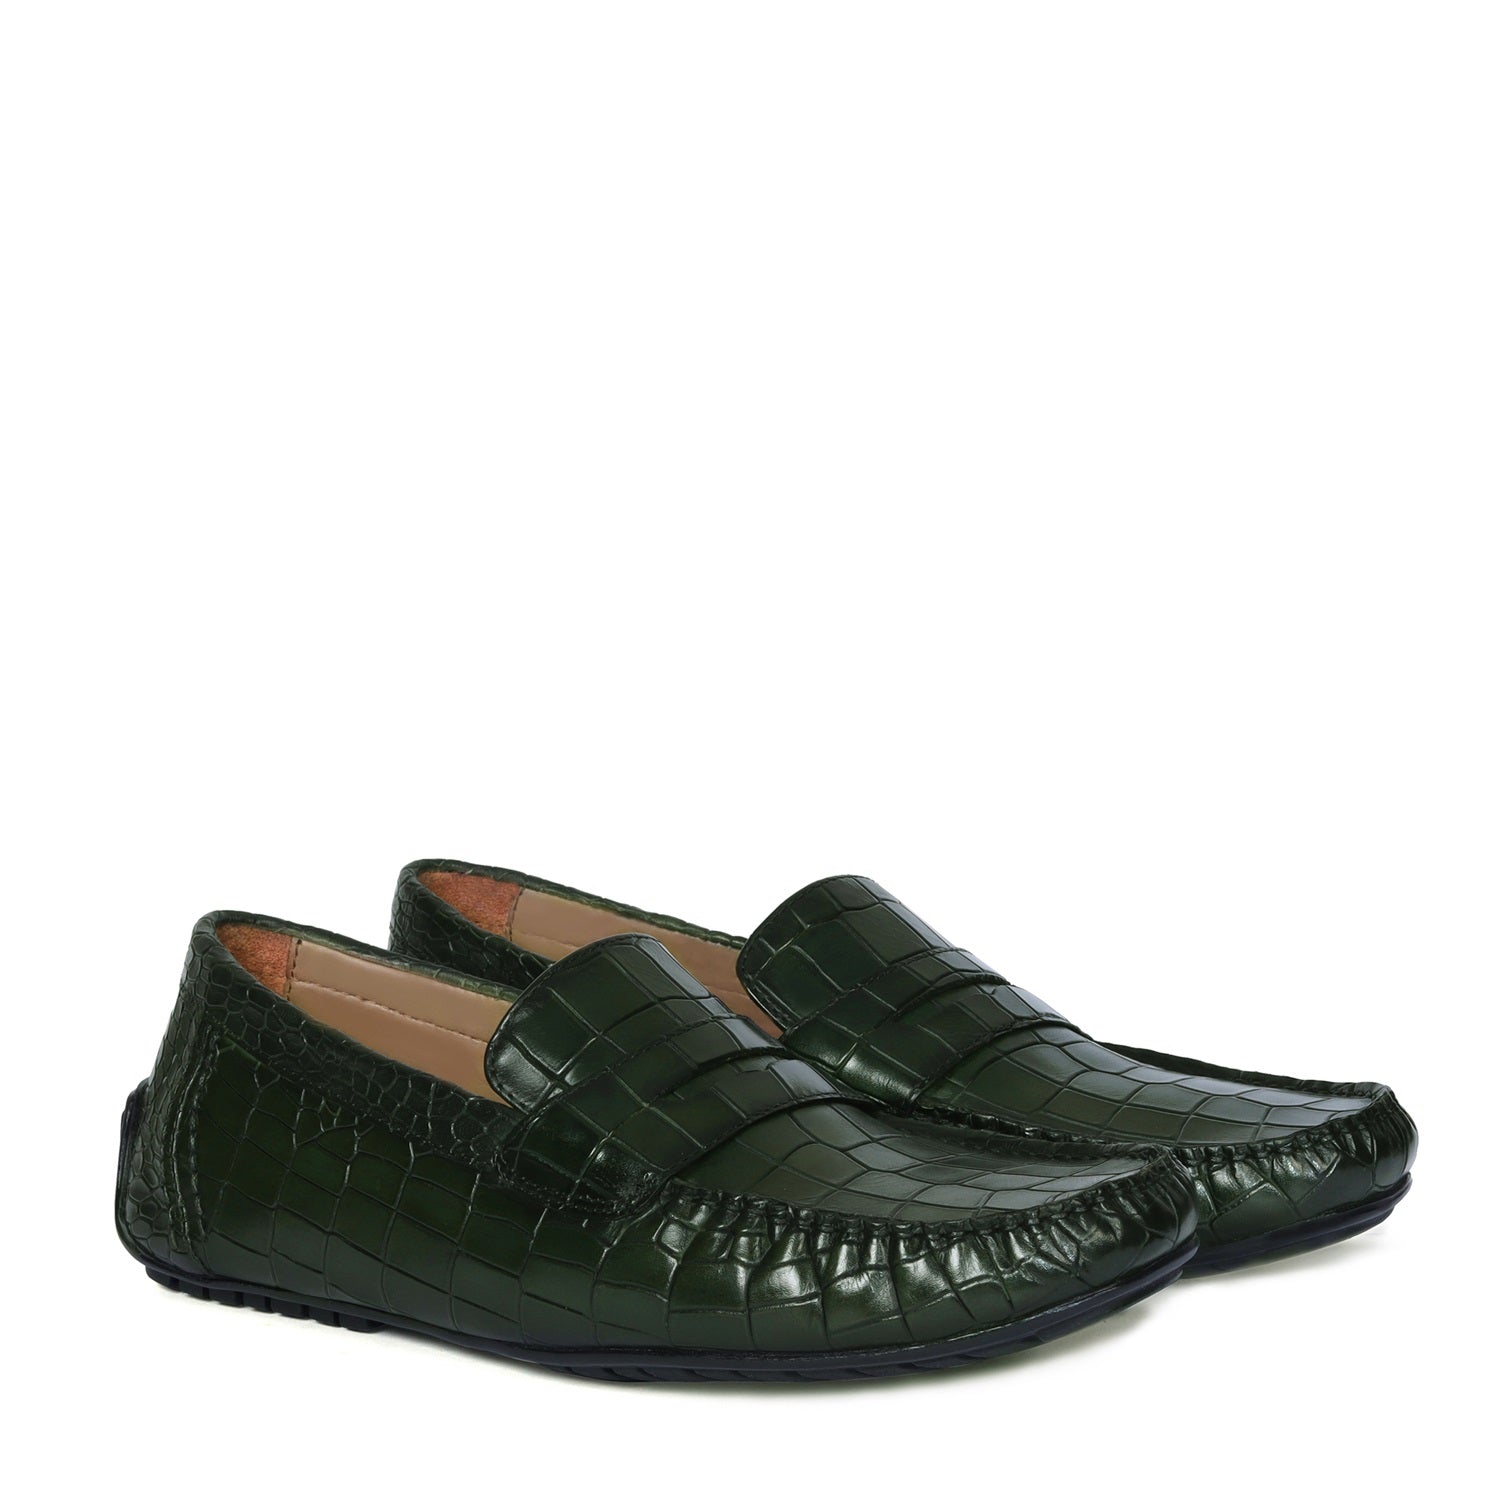 Green Stitched Strap Loafer in Deep Cut Leather